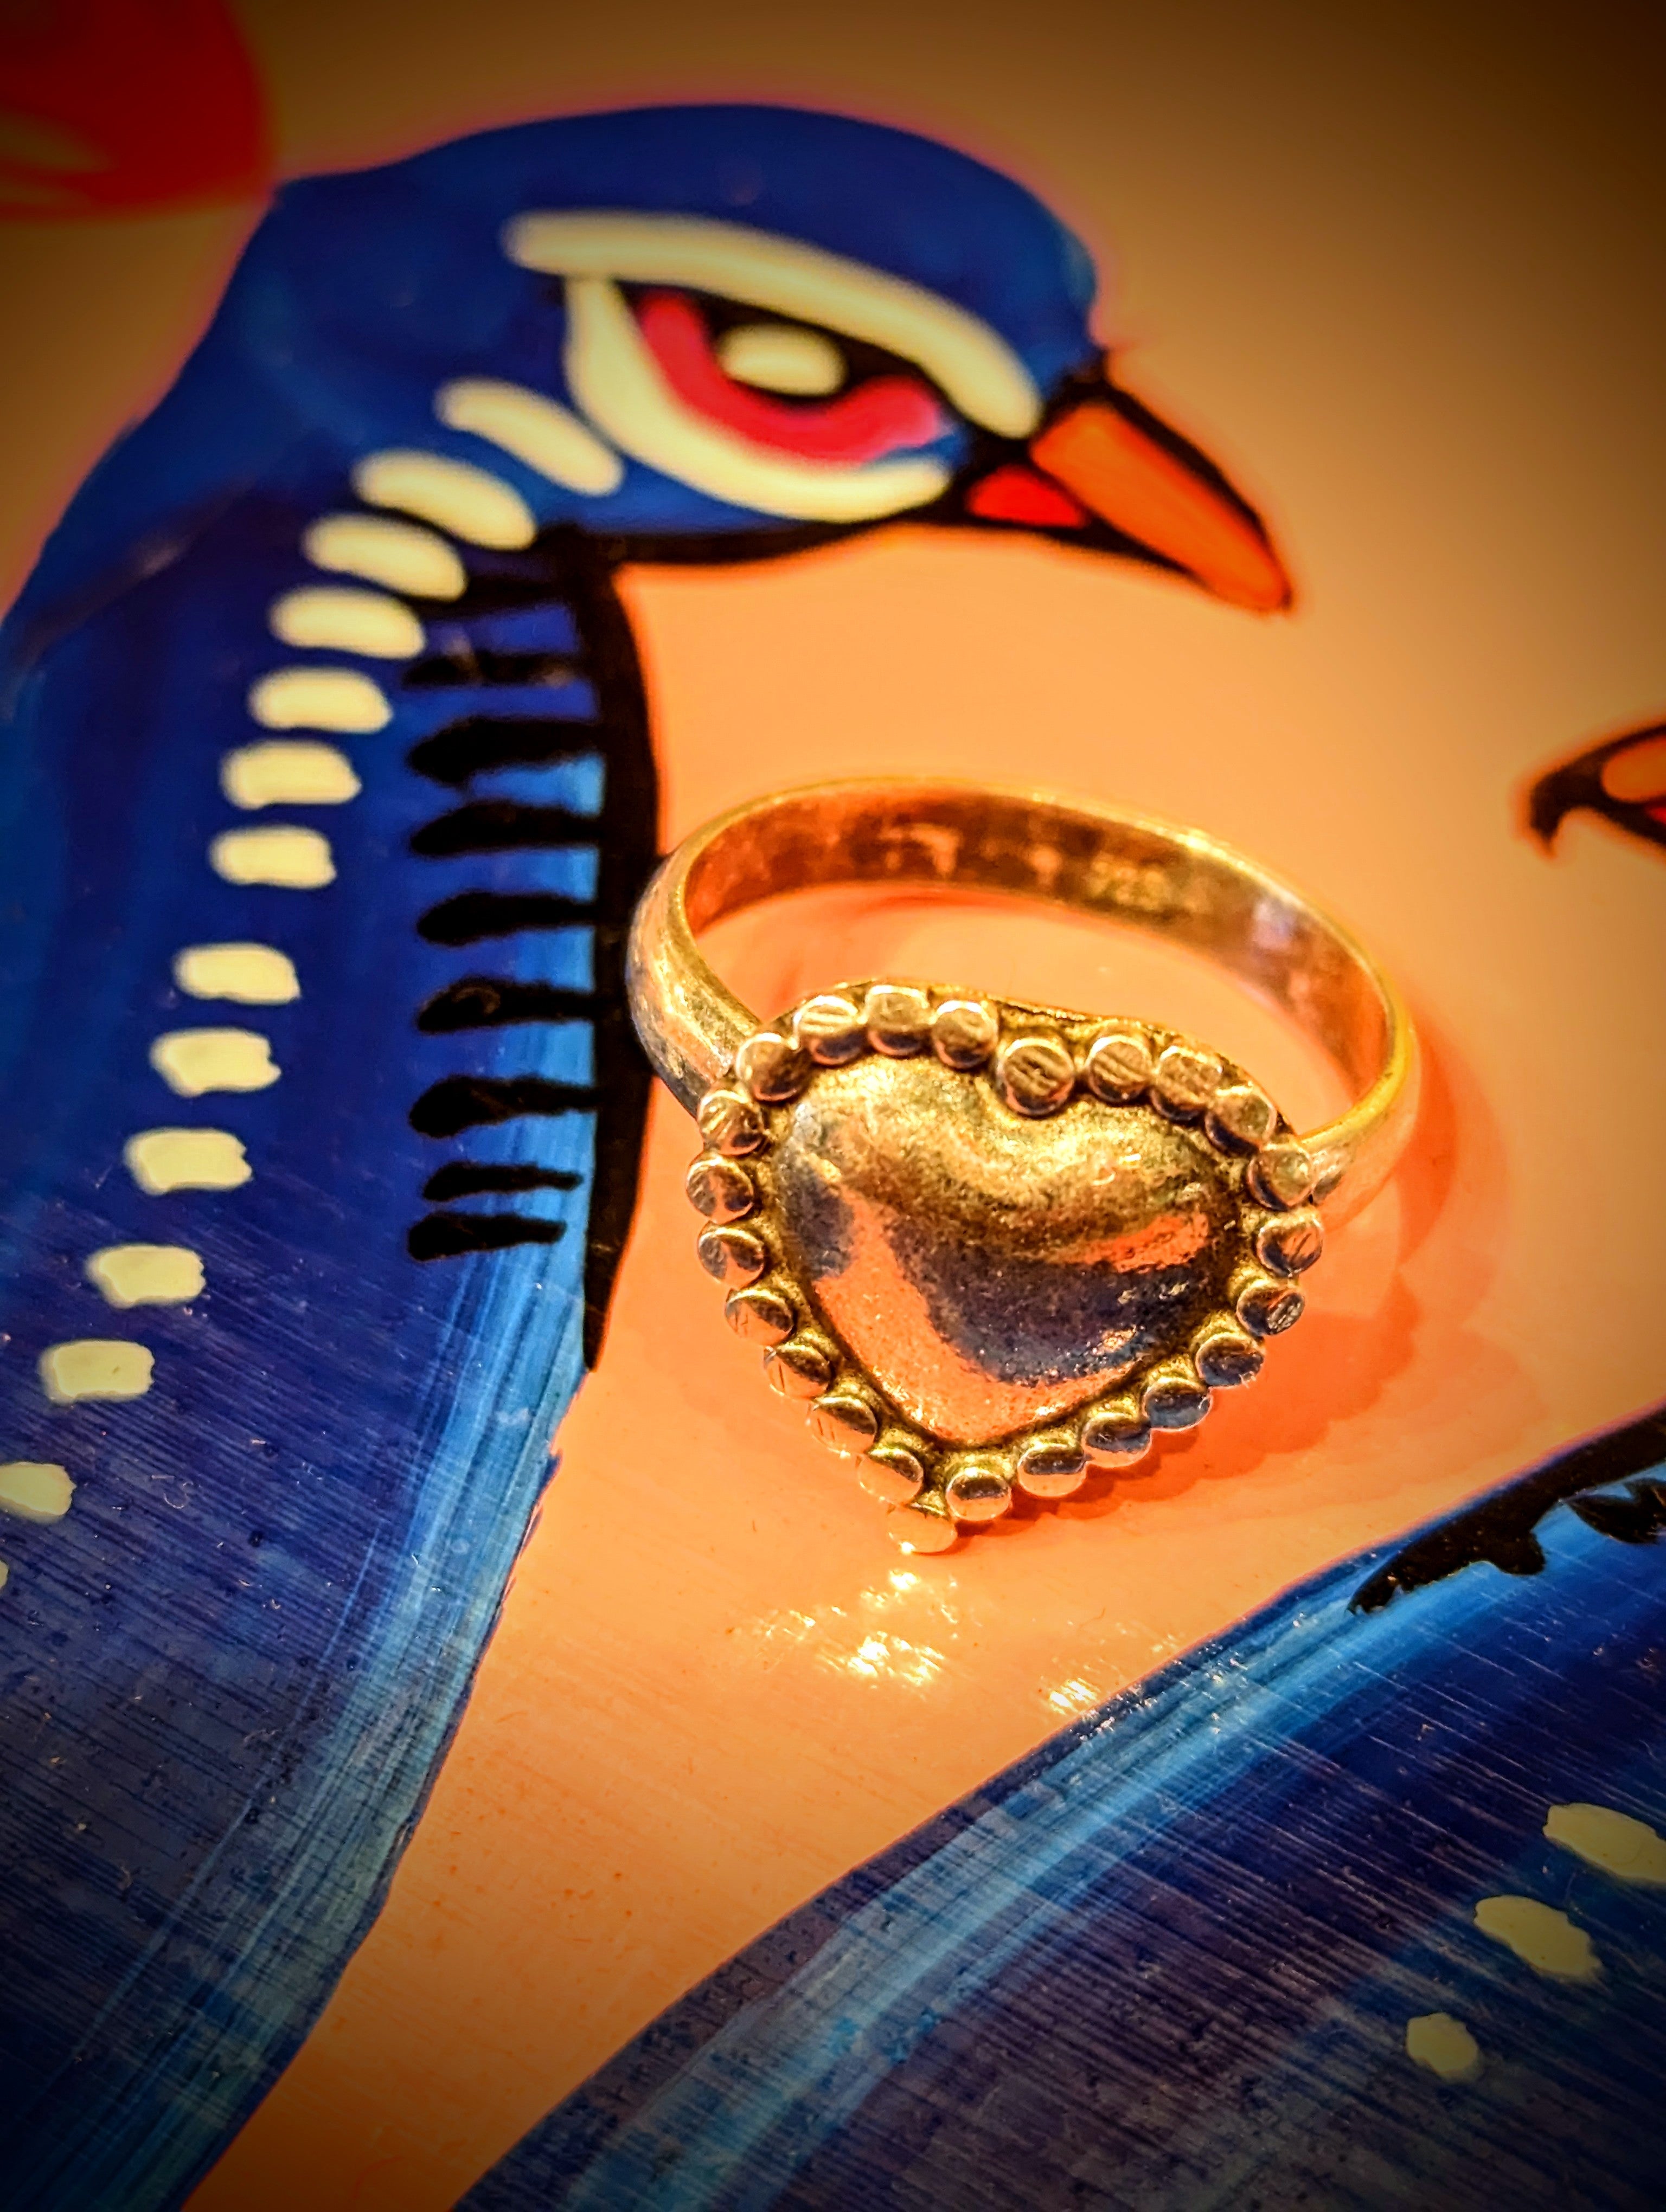 Nomad heart rings